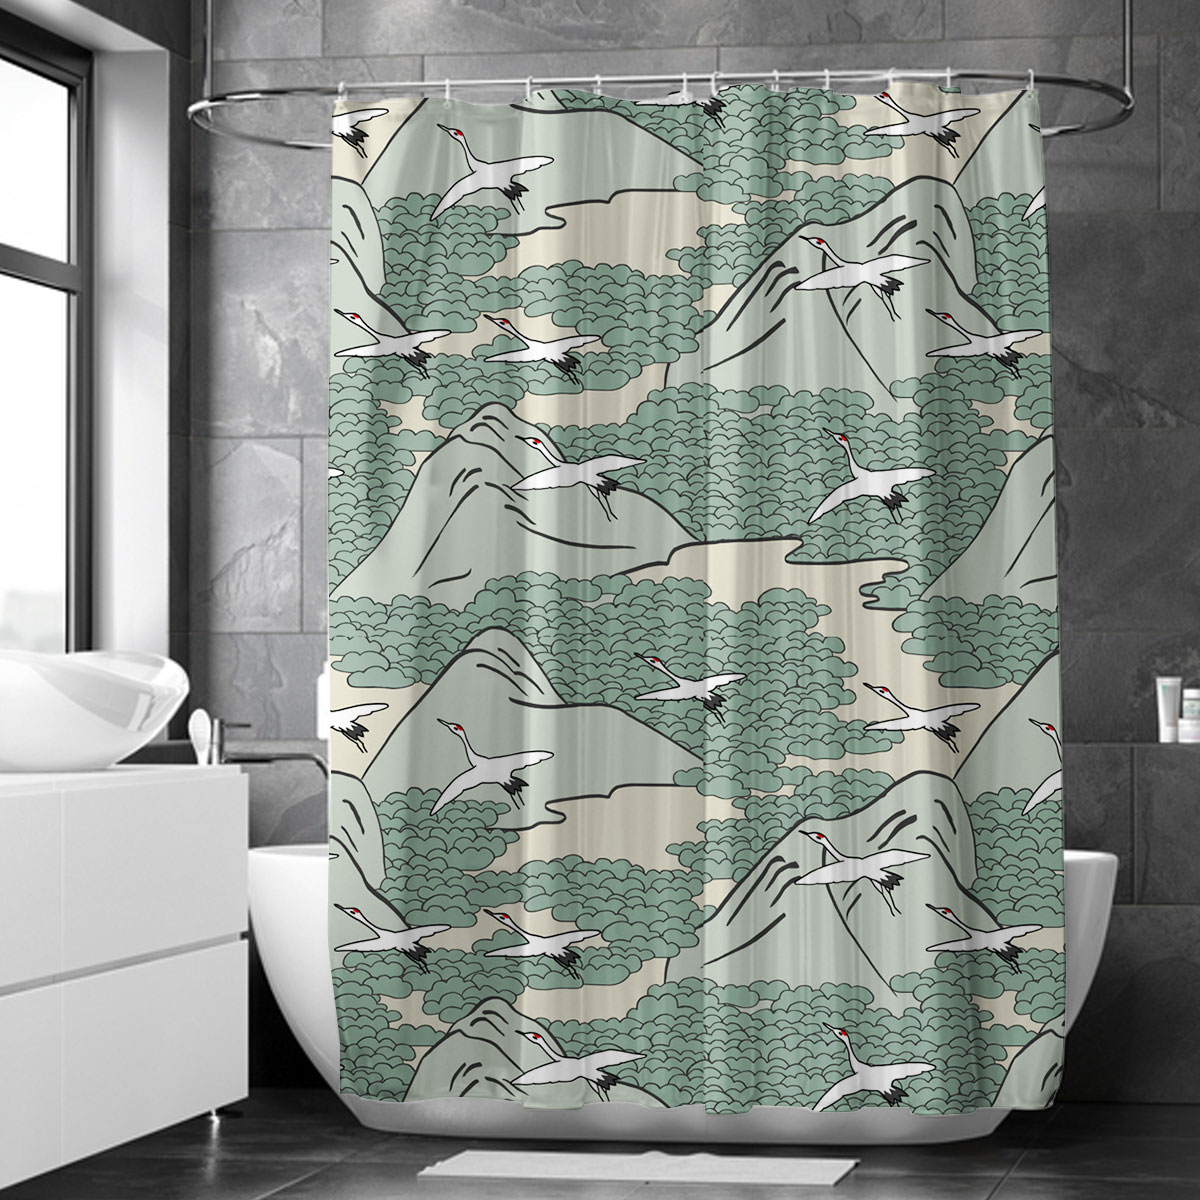 Crane Flying Over Mountain Shower Curtain